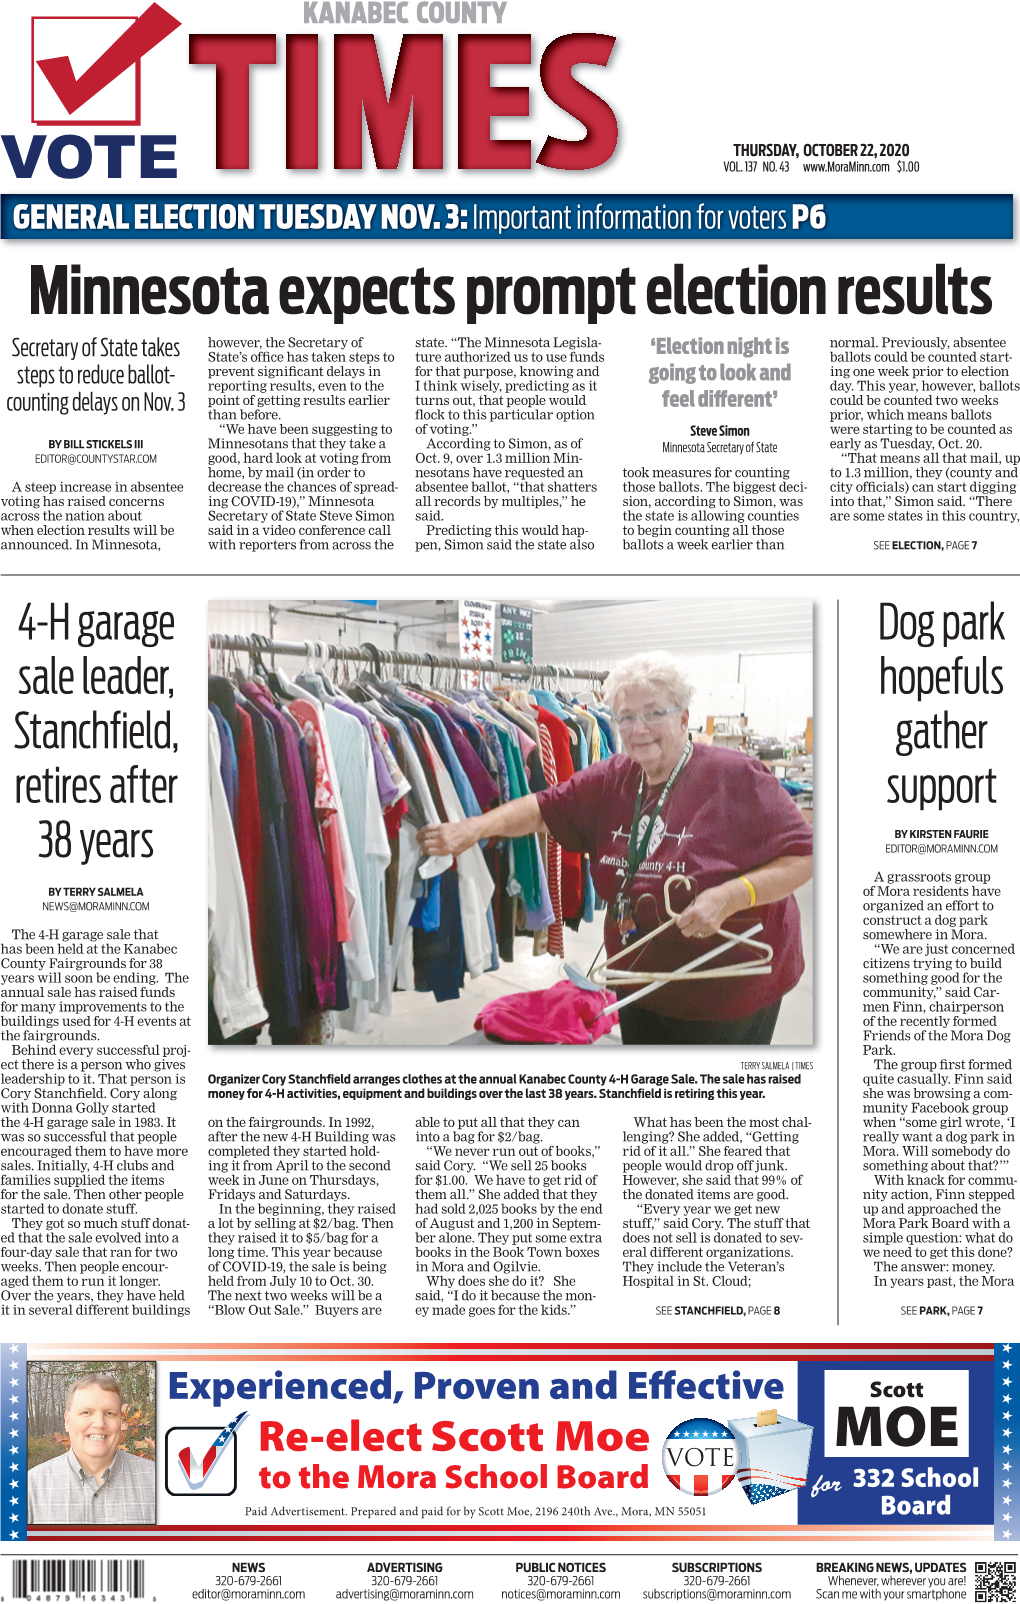 Minnesota Expects Prompt Election Results However, the Secretary of State